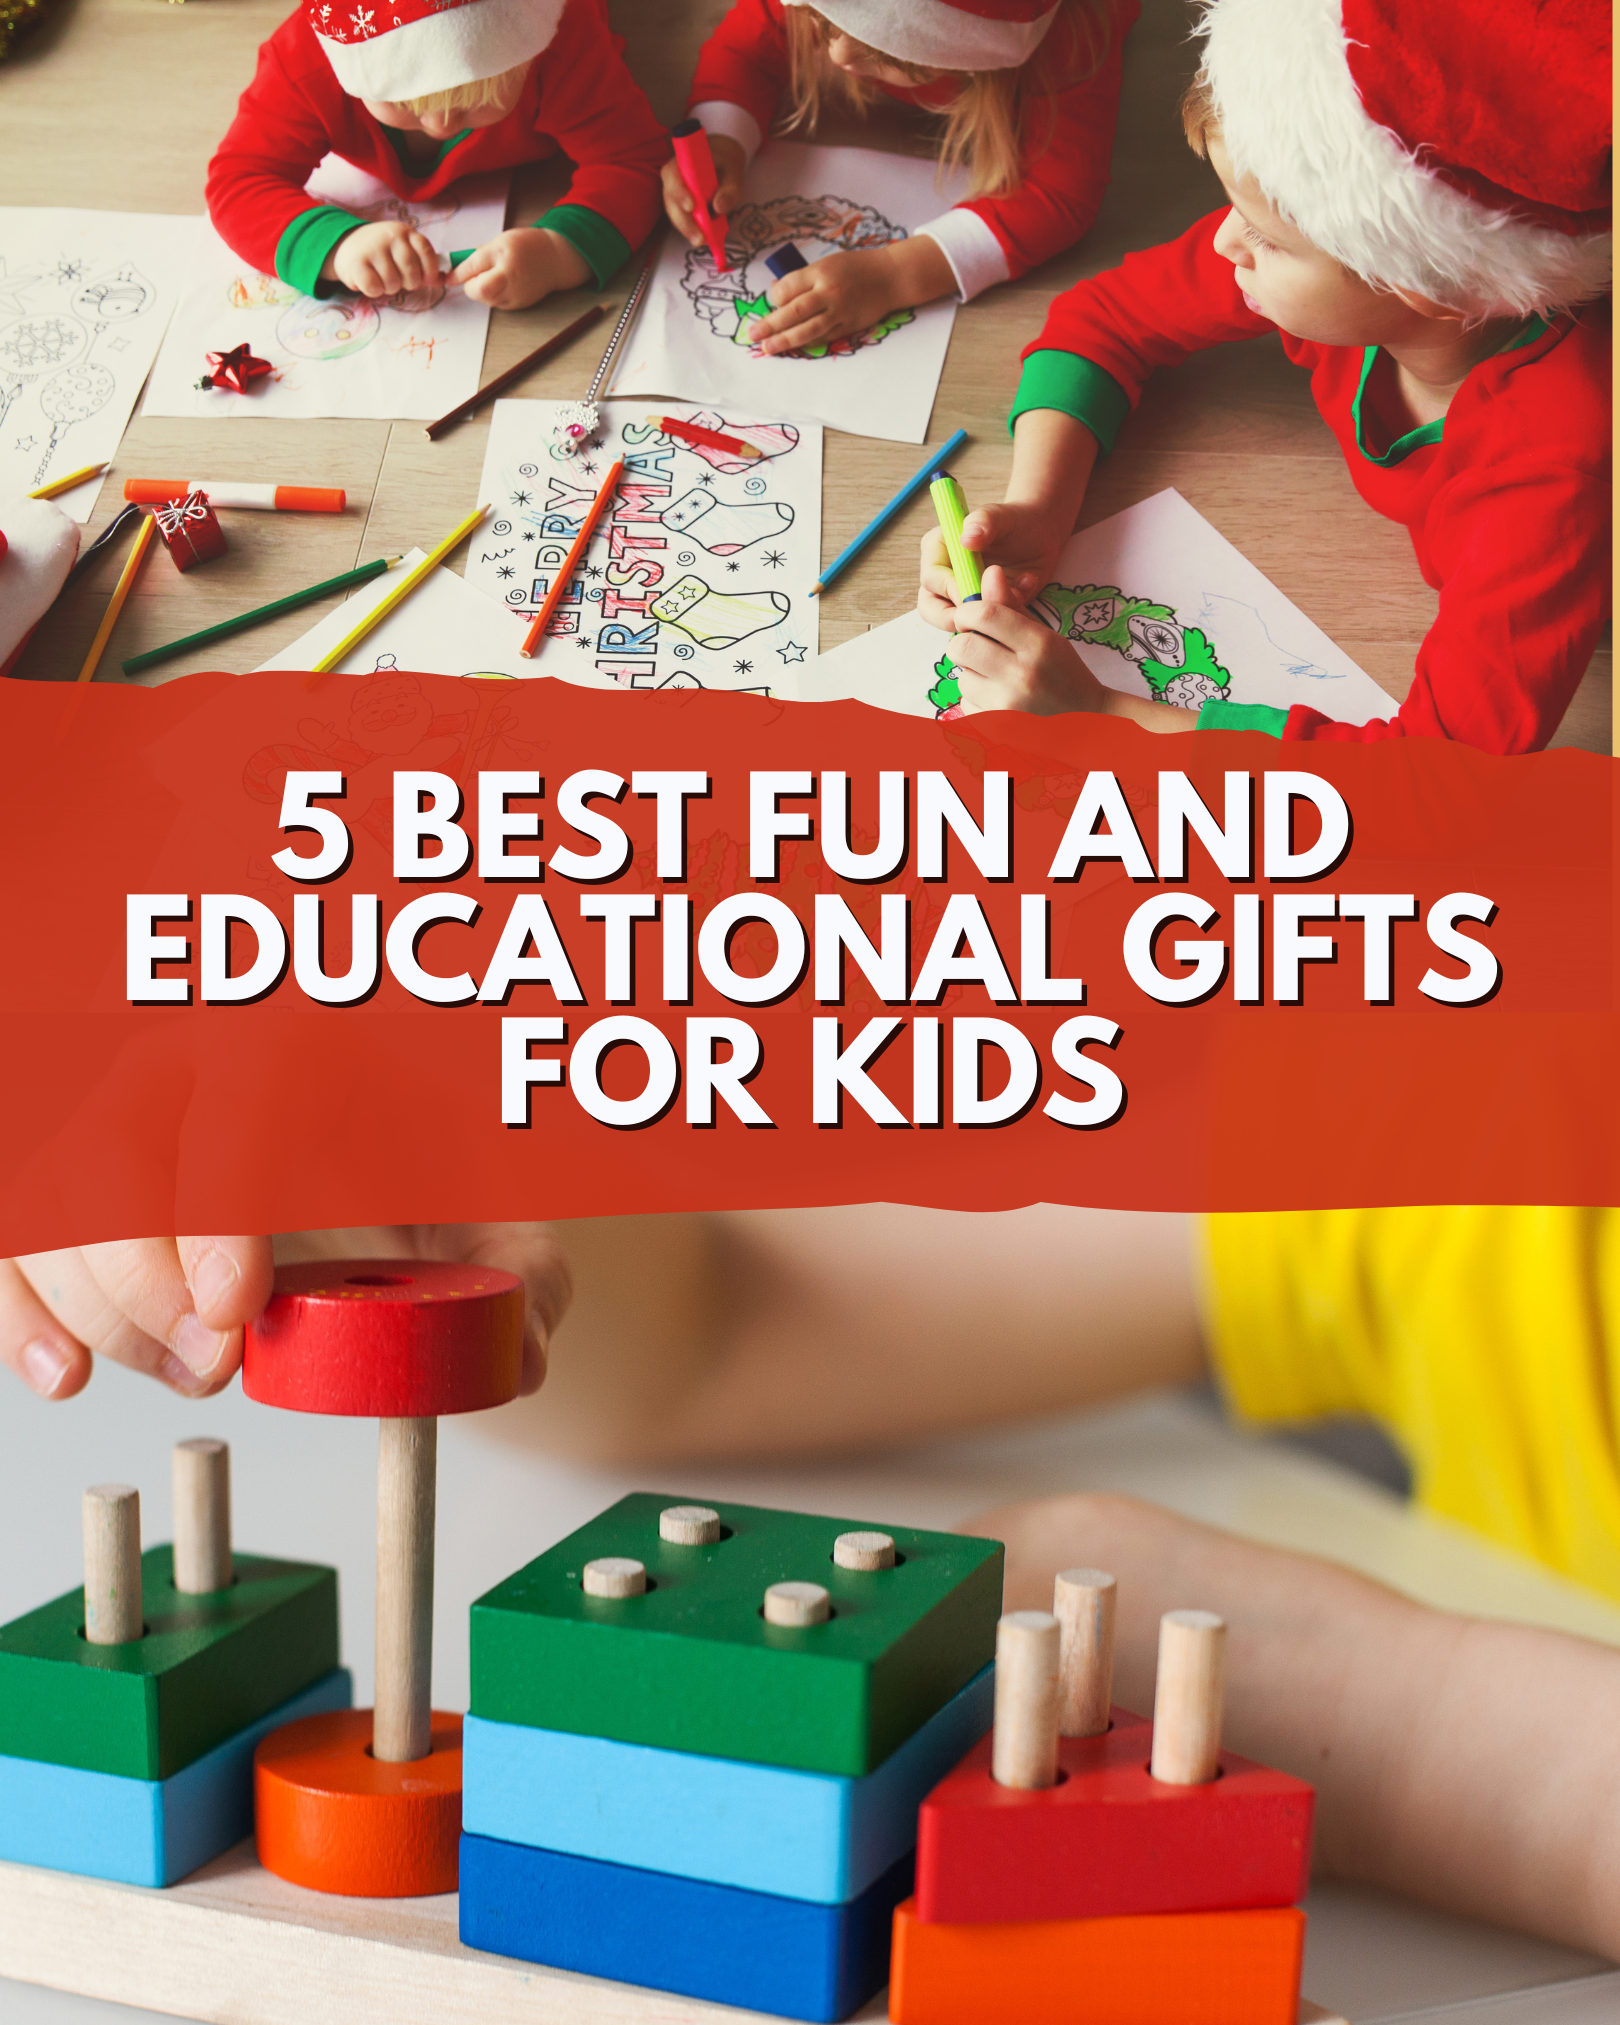 5 Best Fun and Educational Gifts for Kids